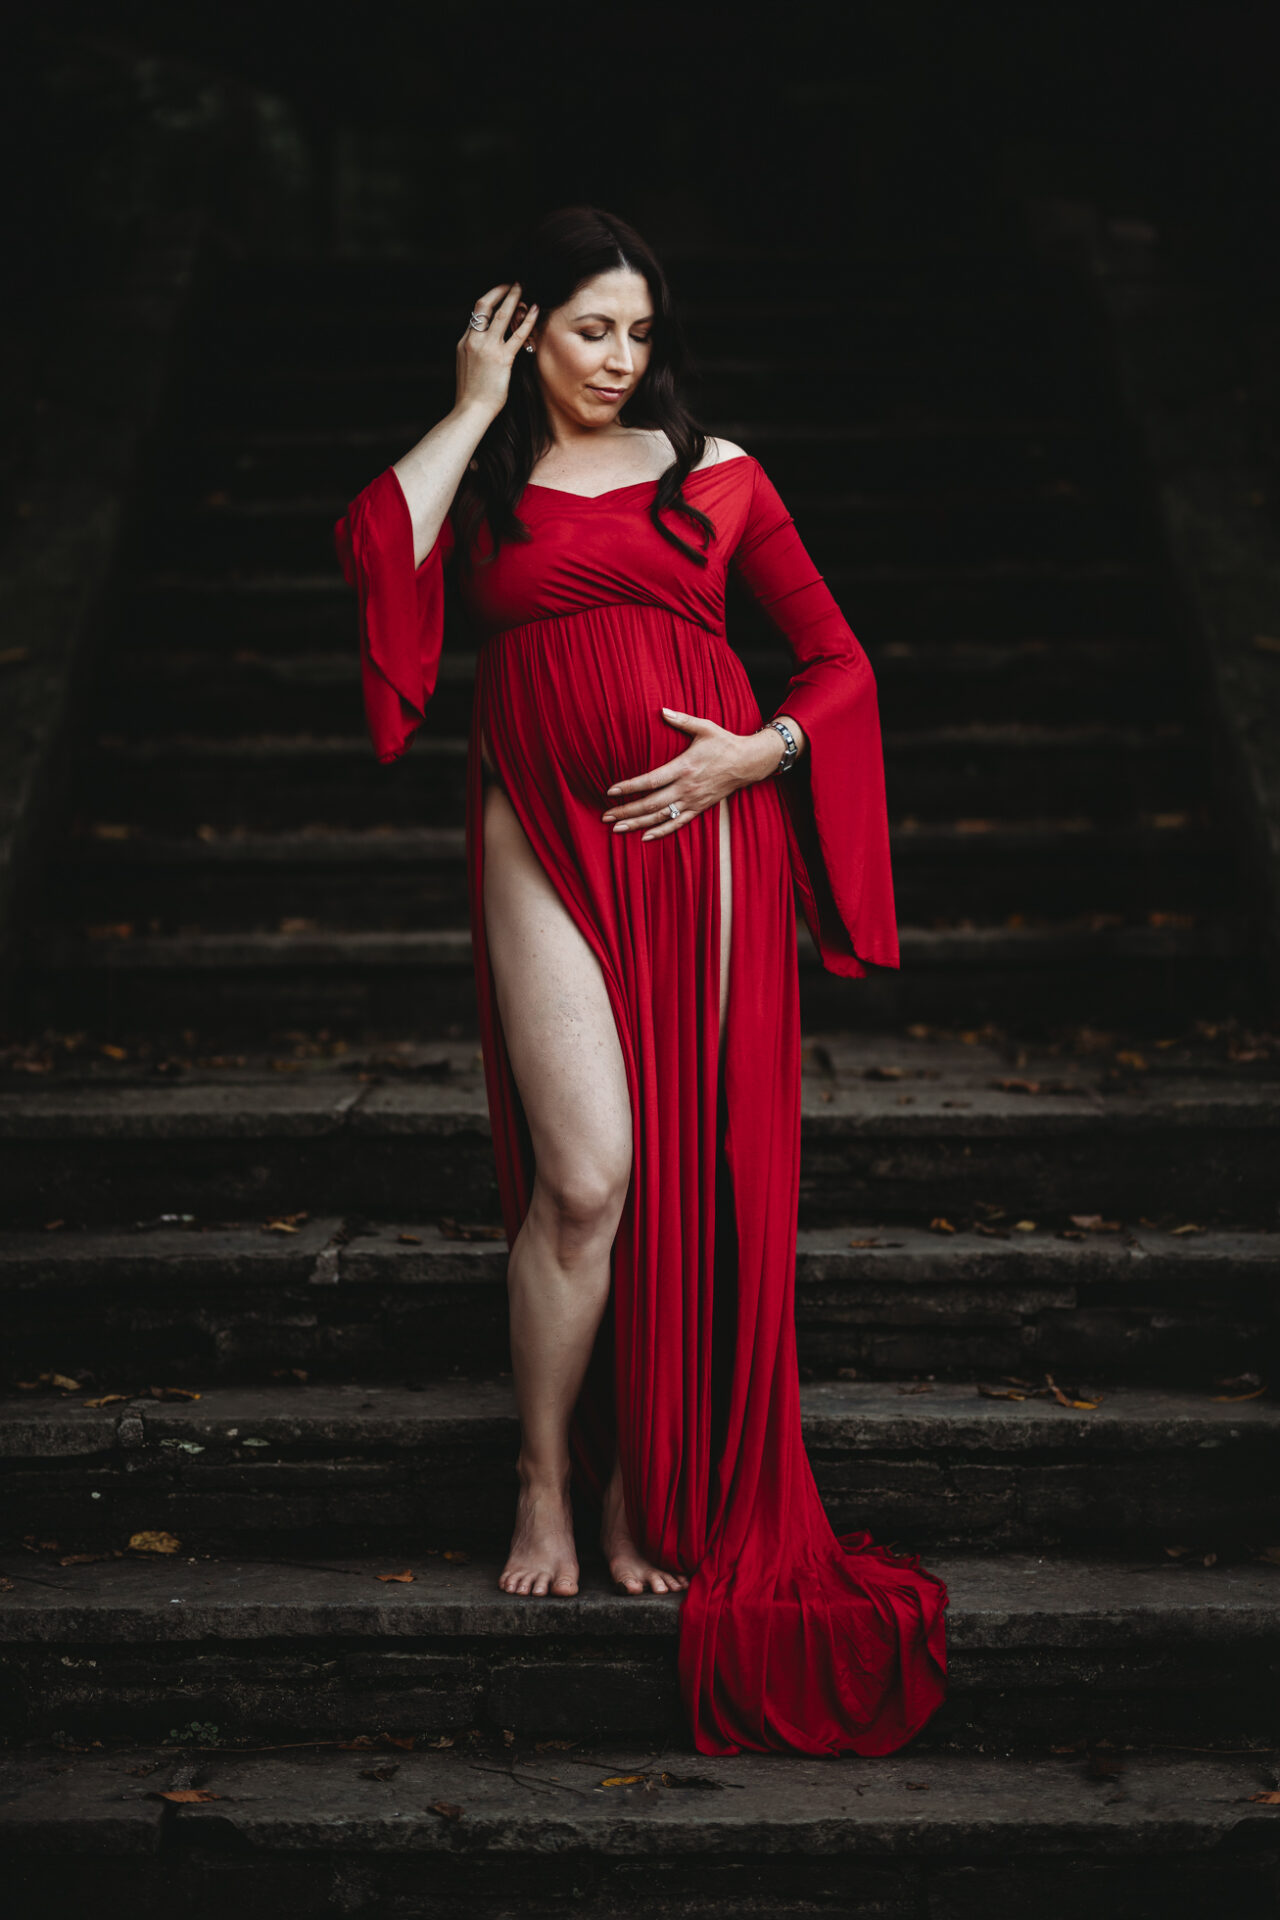 sensual glamorous outdoor maternity pregnancy photo red dress